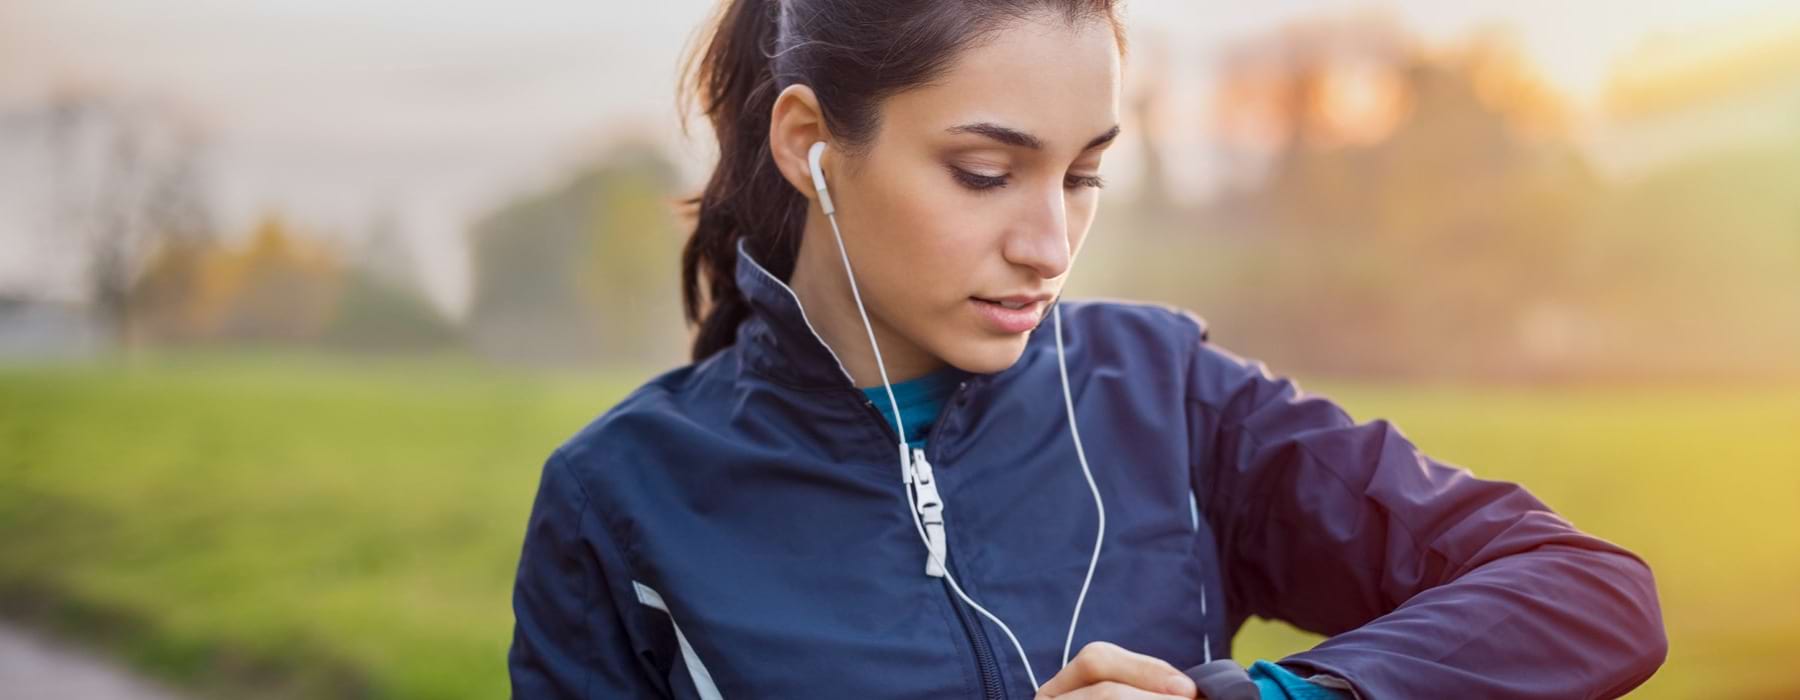 young woman with earbuds in her ears, on a run, stops to look at her watch